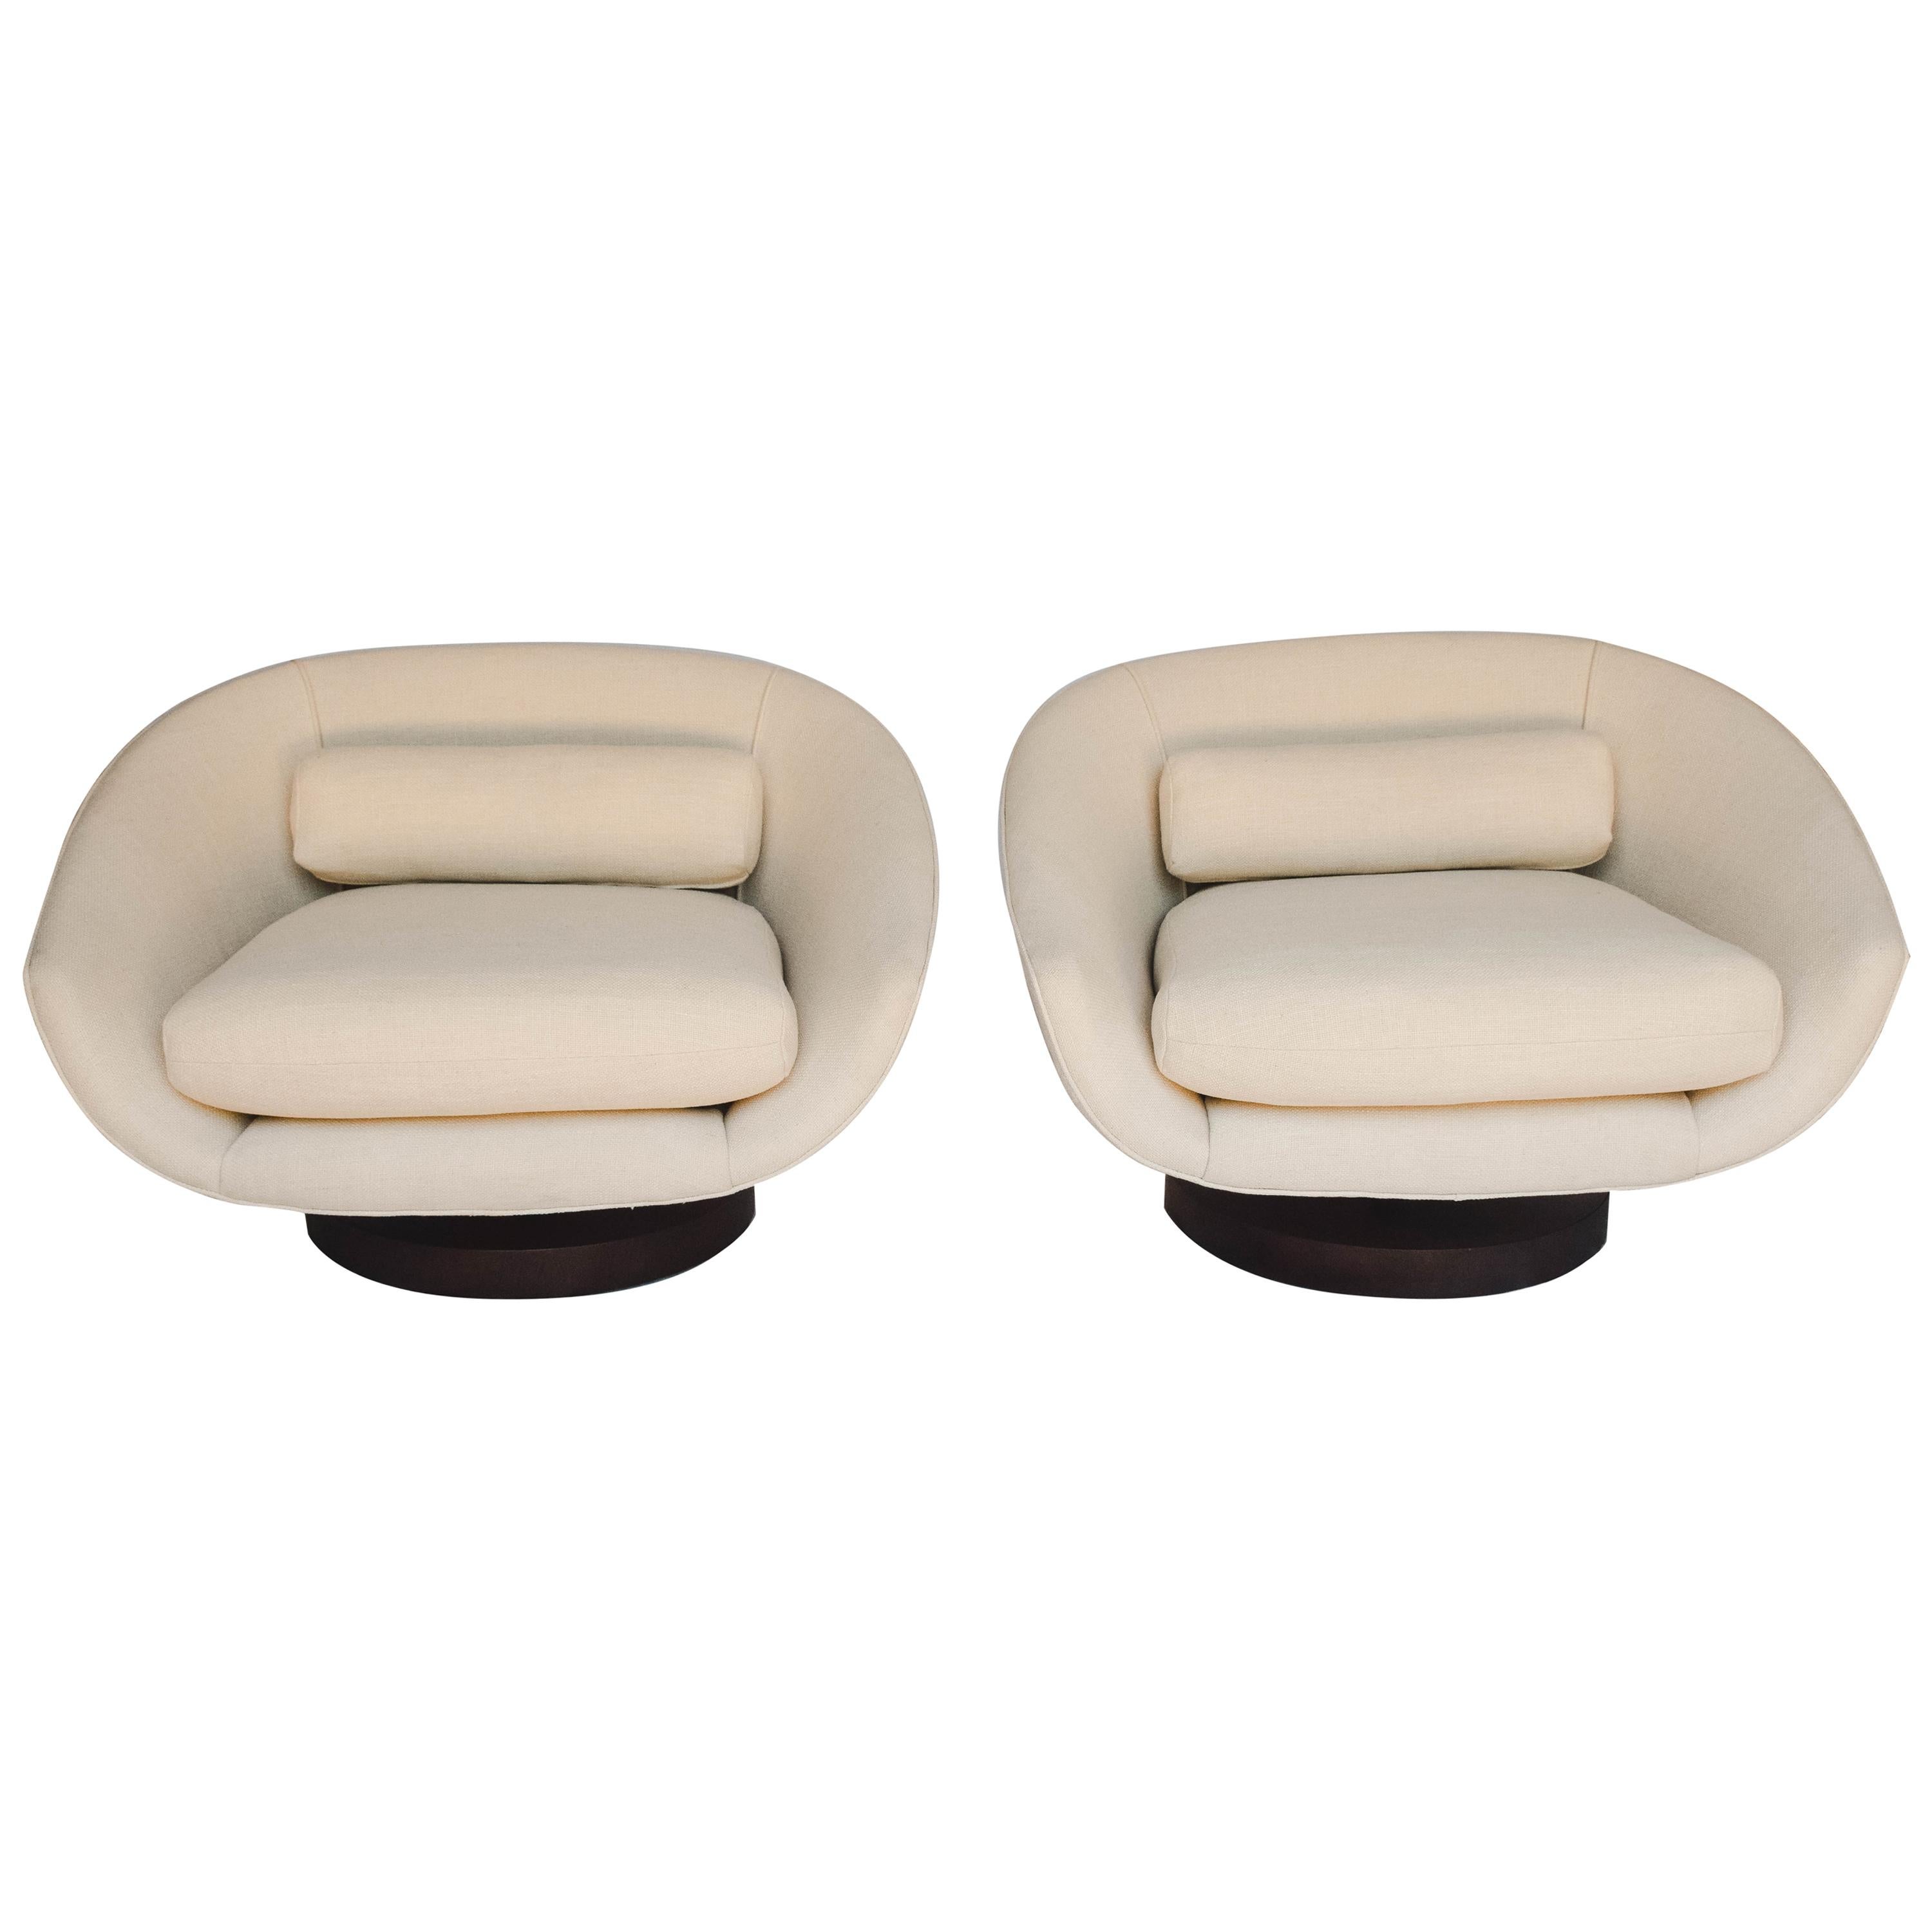 Pair of Mid-Century Modern Swivel Chairs, in the style of Milo Baughman